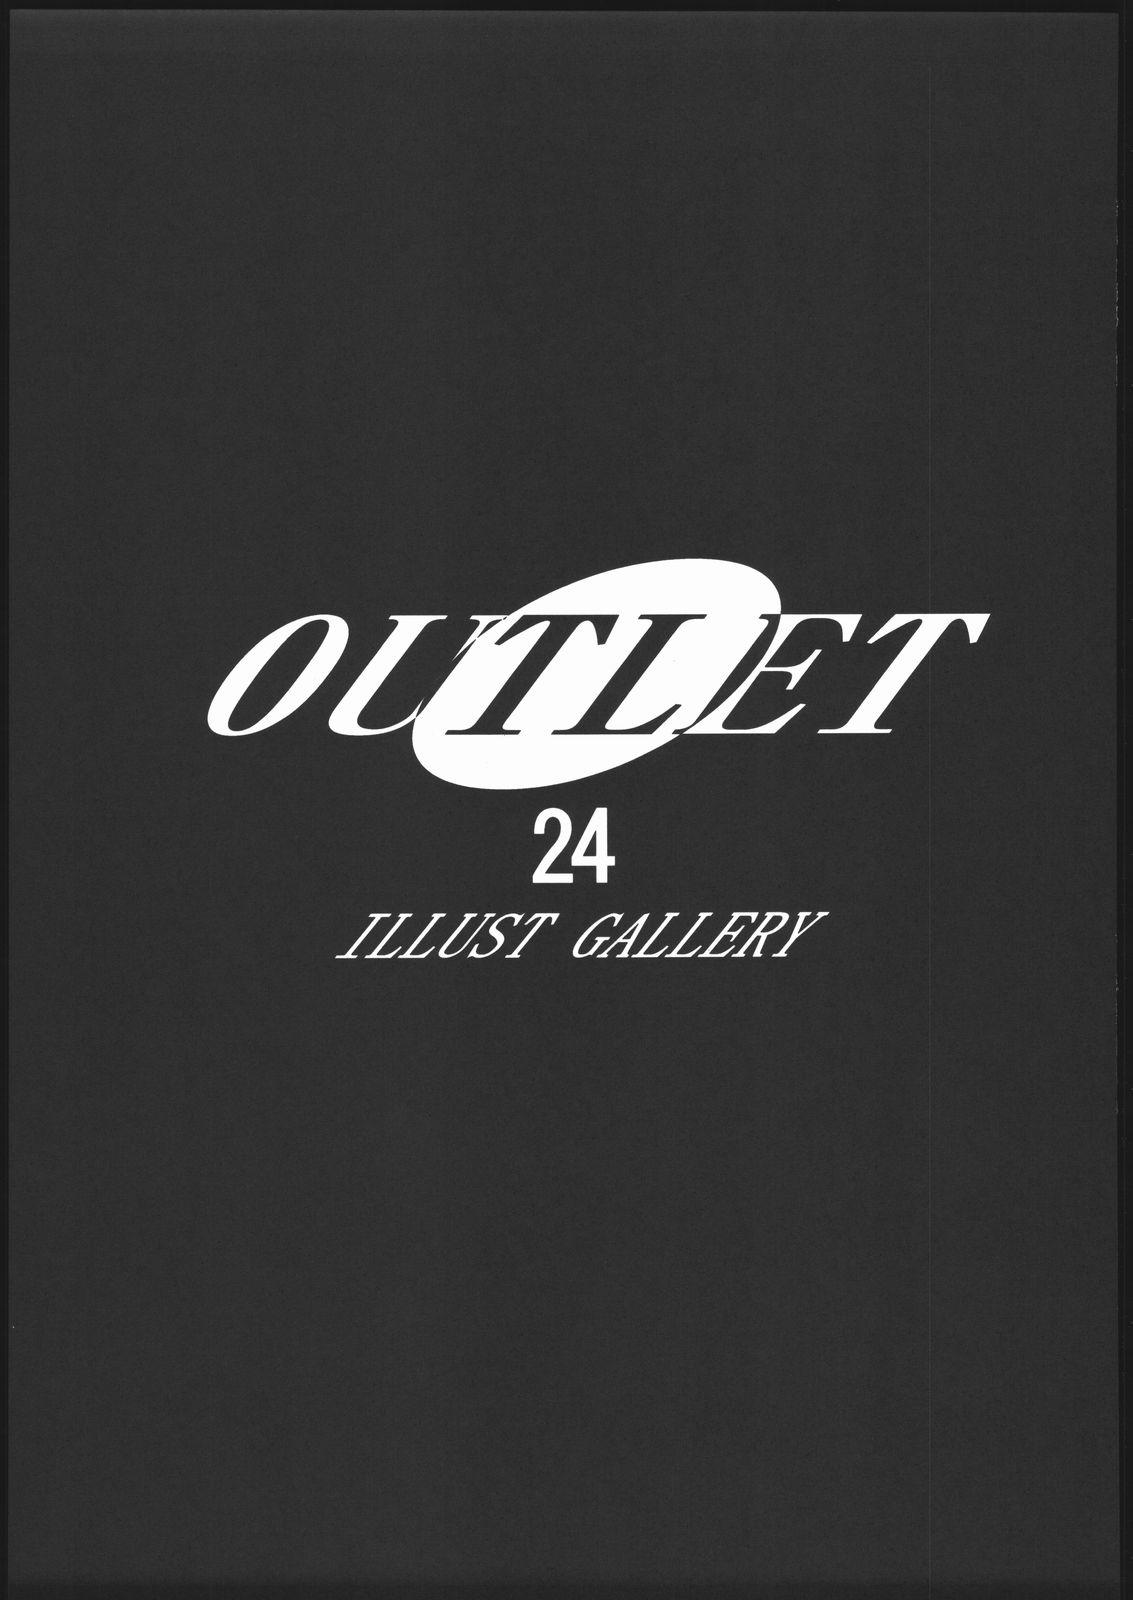 OUTLET 24 39